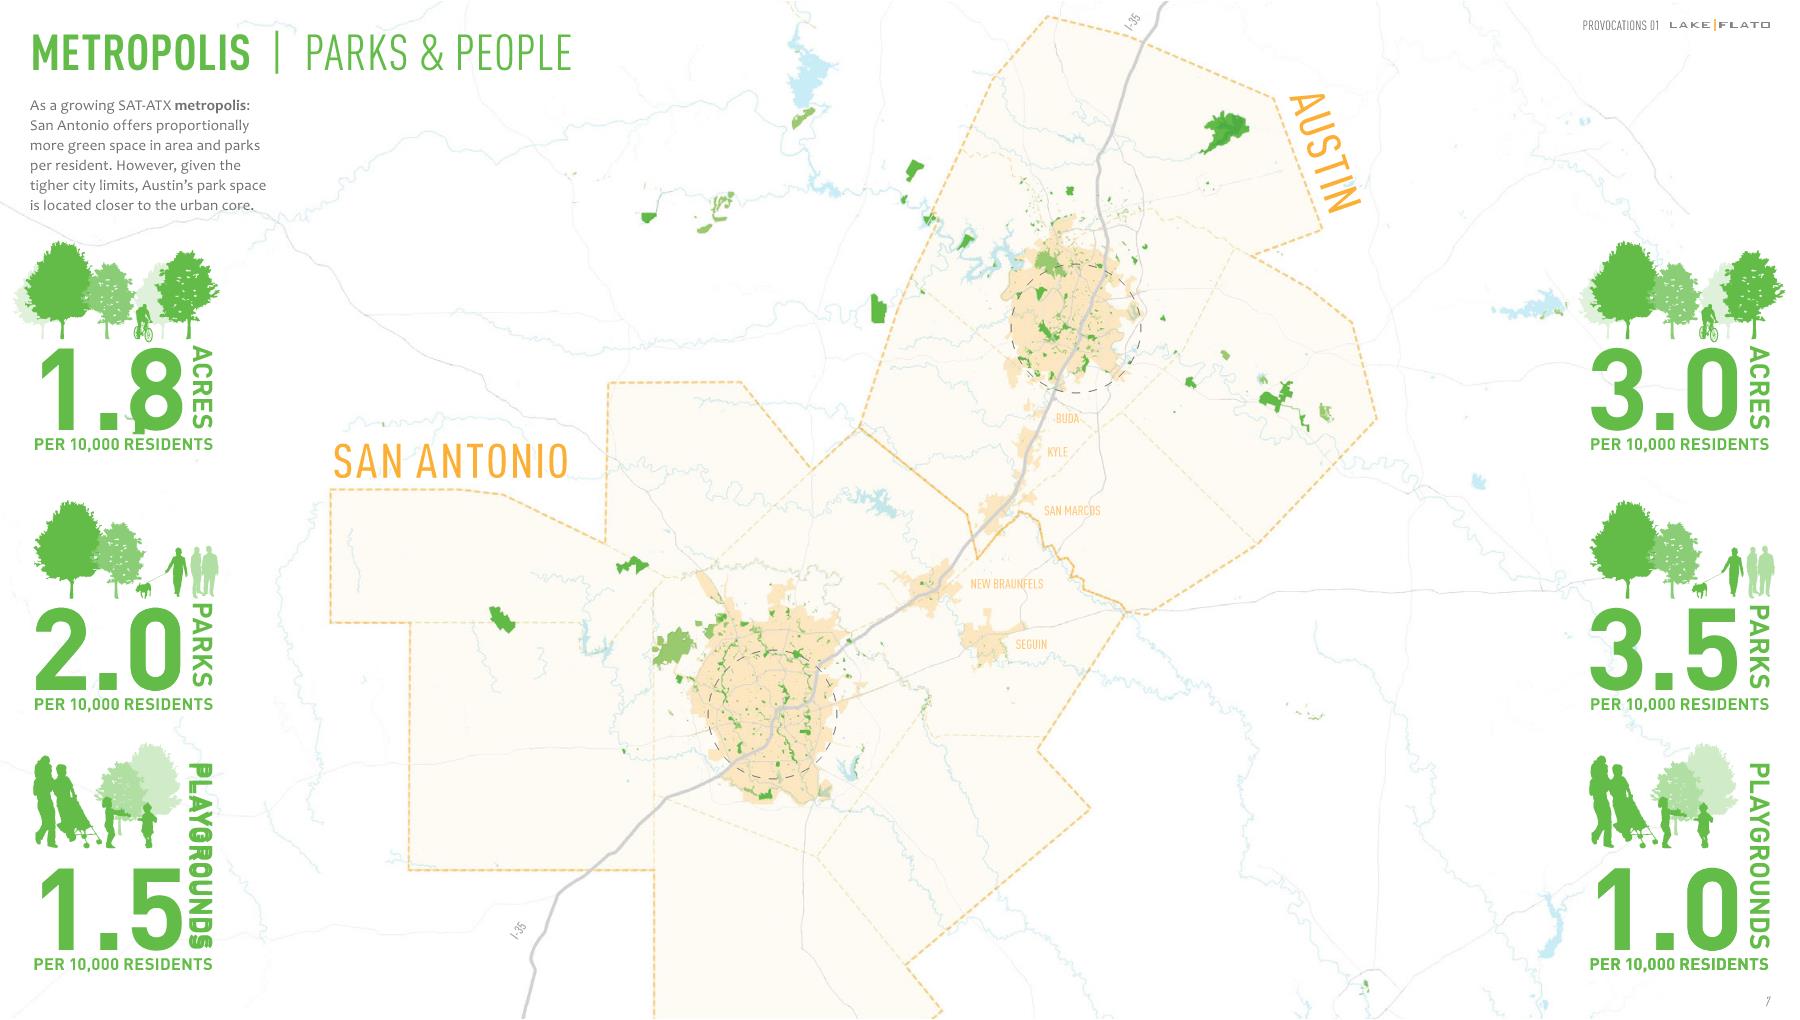 Diagrams comparing green space in area and number of parks per resident between San Antonio and Austin.